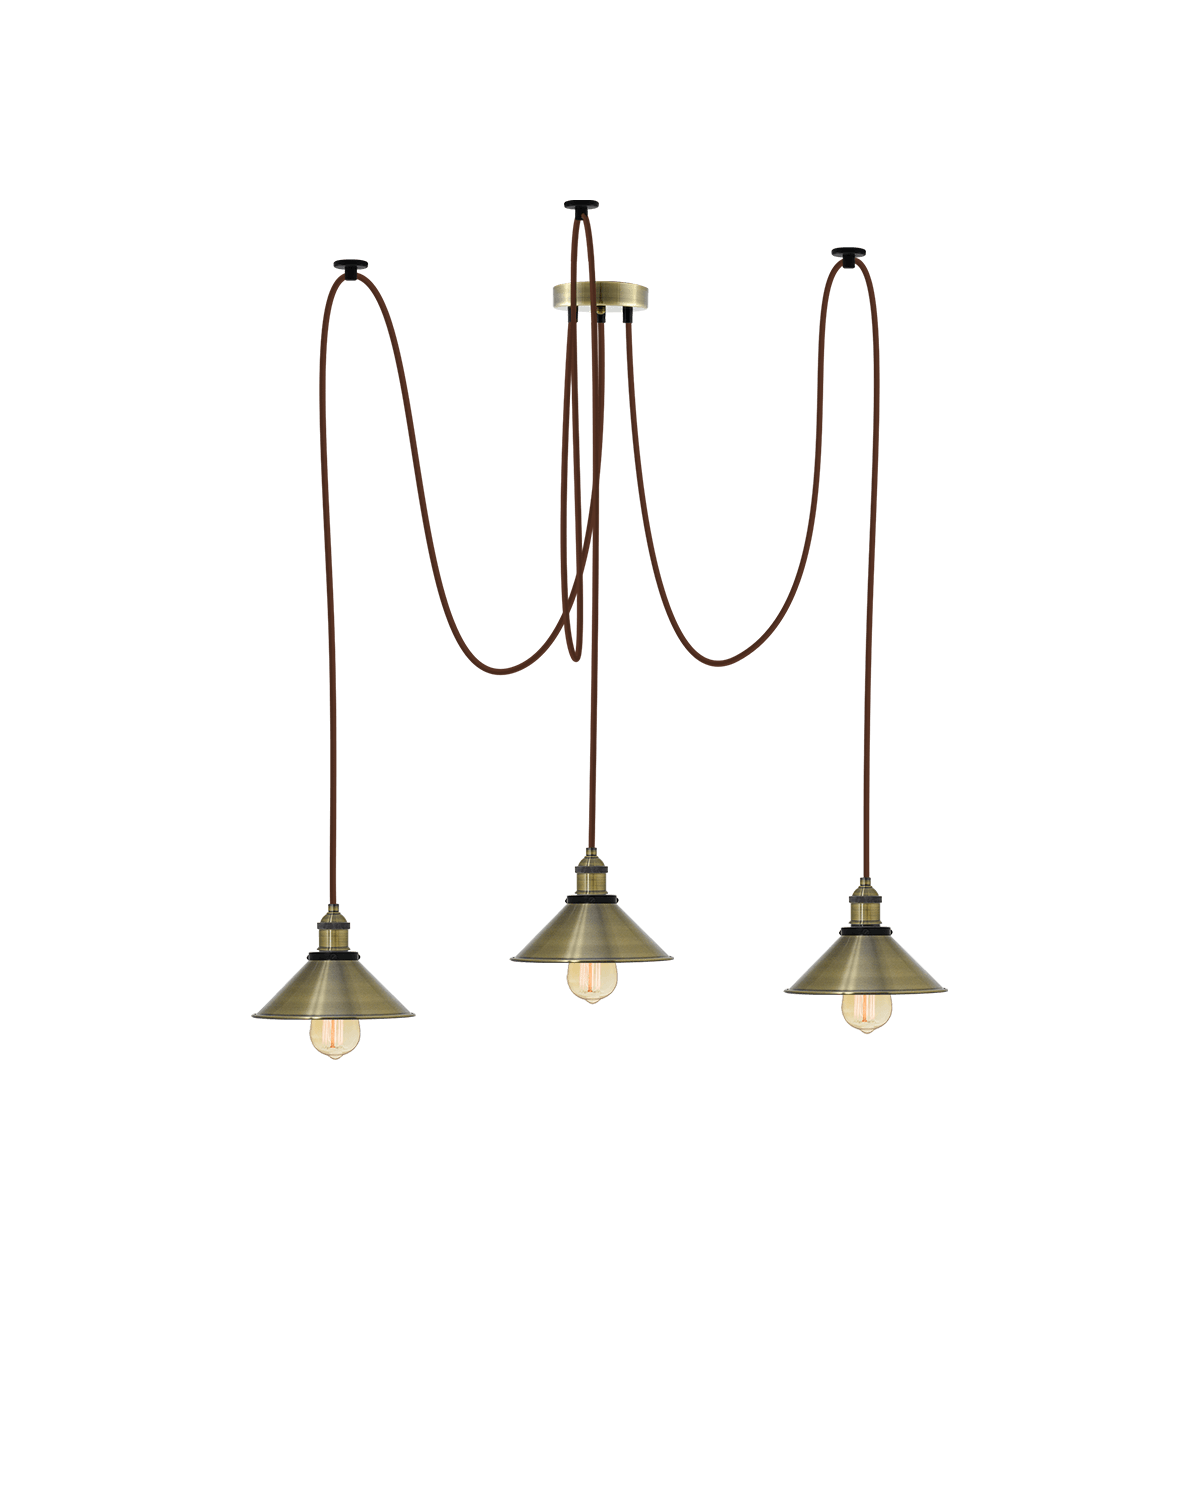 Swag Chandelier: Brown and Antique Cone Shades Hangout Lighting 3 Swag